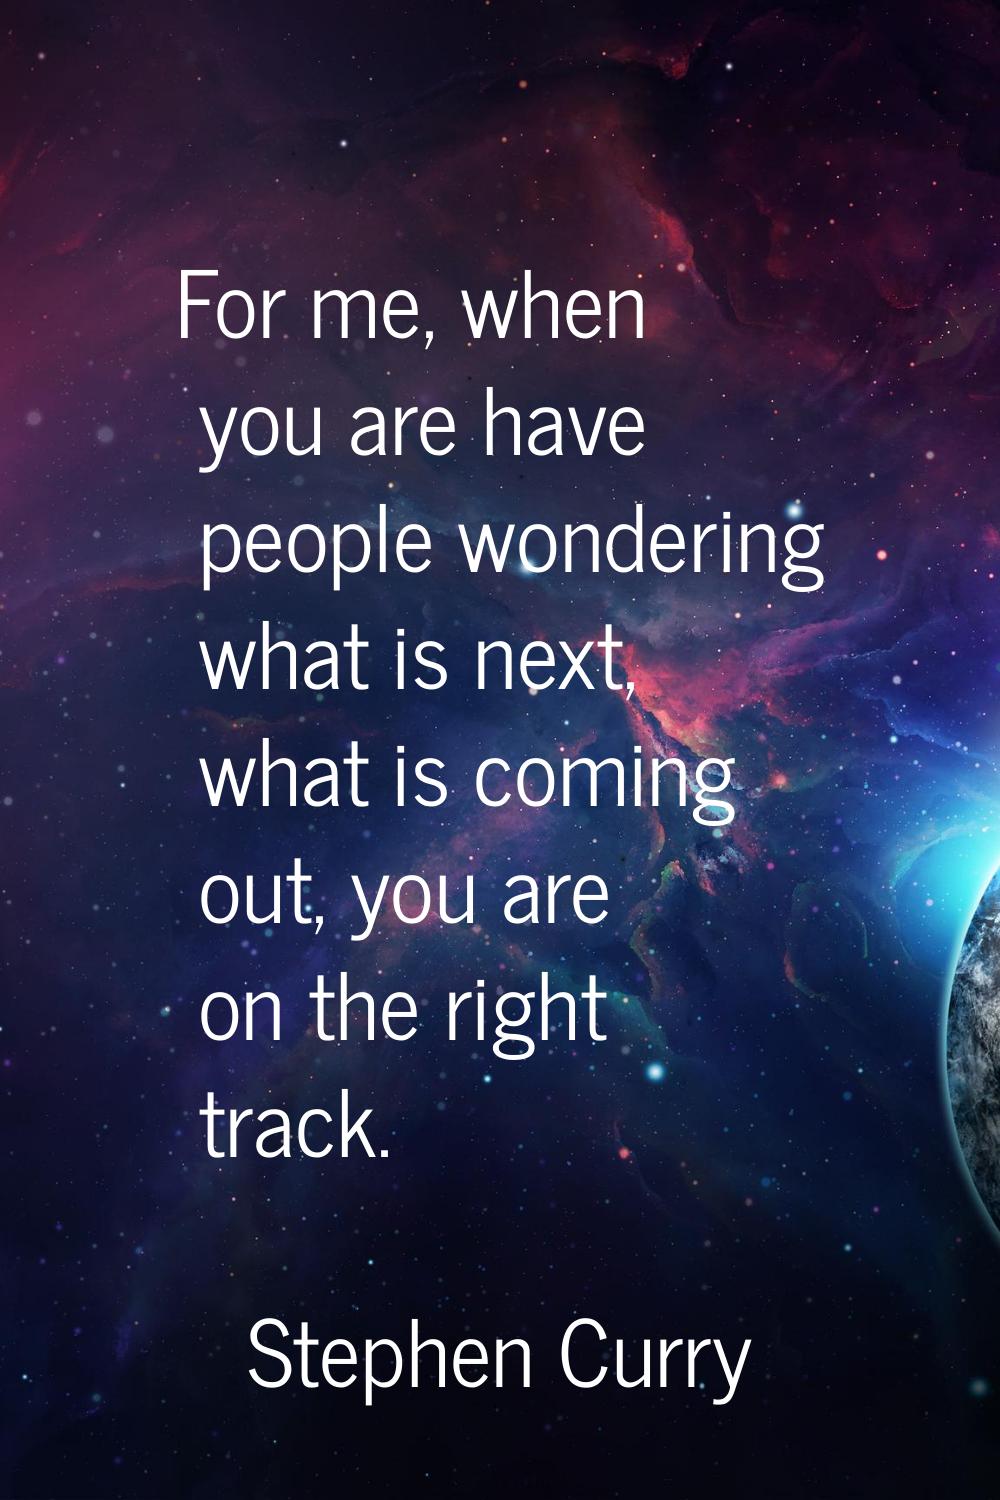 For me, when you are have people wondering what is next, what is coming out, you are on the right t